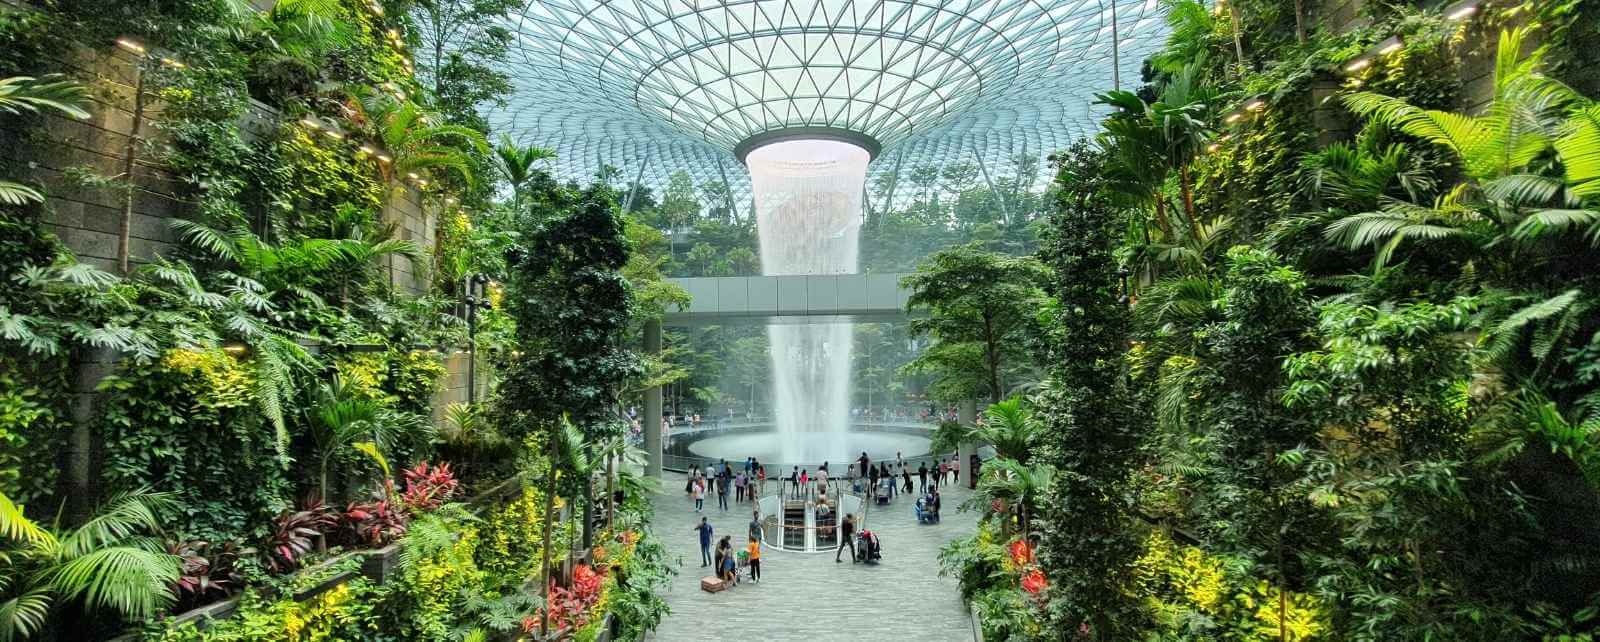 Changi airport Singapore going to build the same in Labuan Bajo